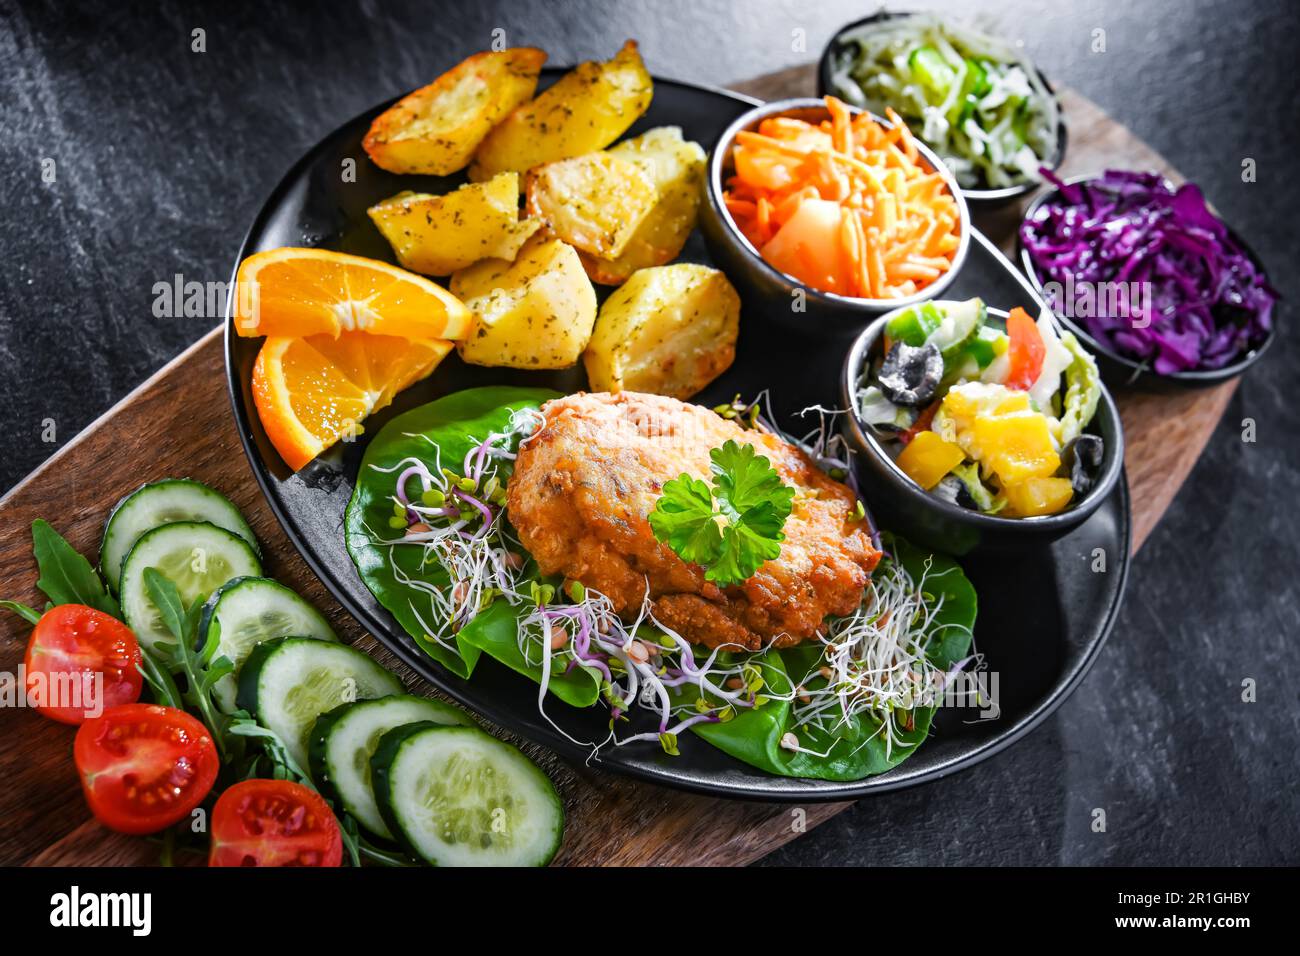 Pulled chicken cutlet coated with breadcrumbs with potatoes and vegetable salads Stock Photo